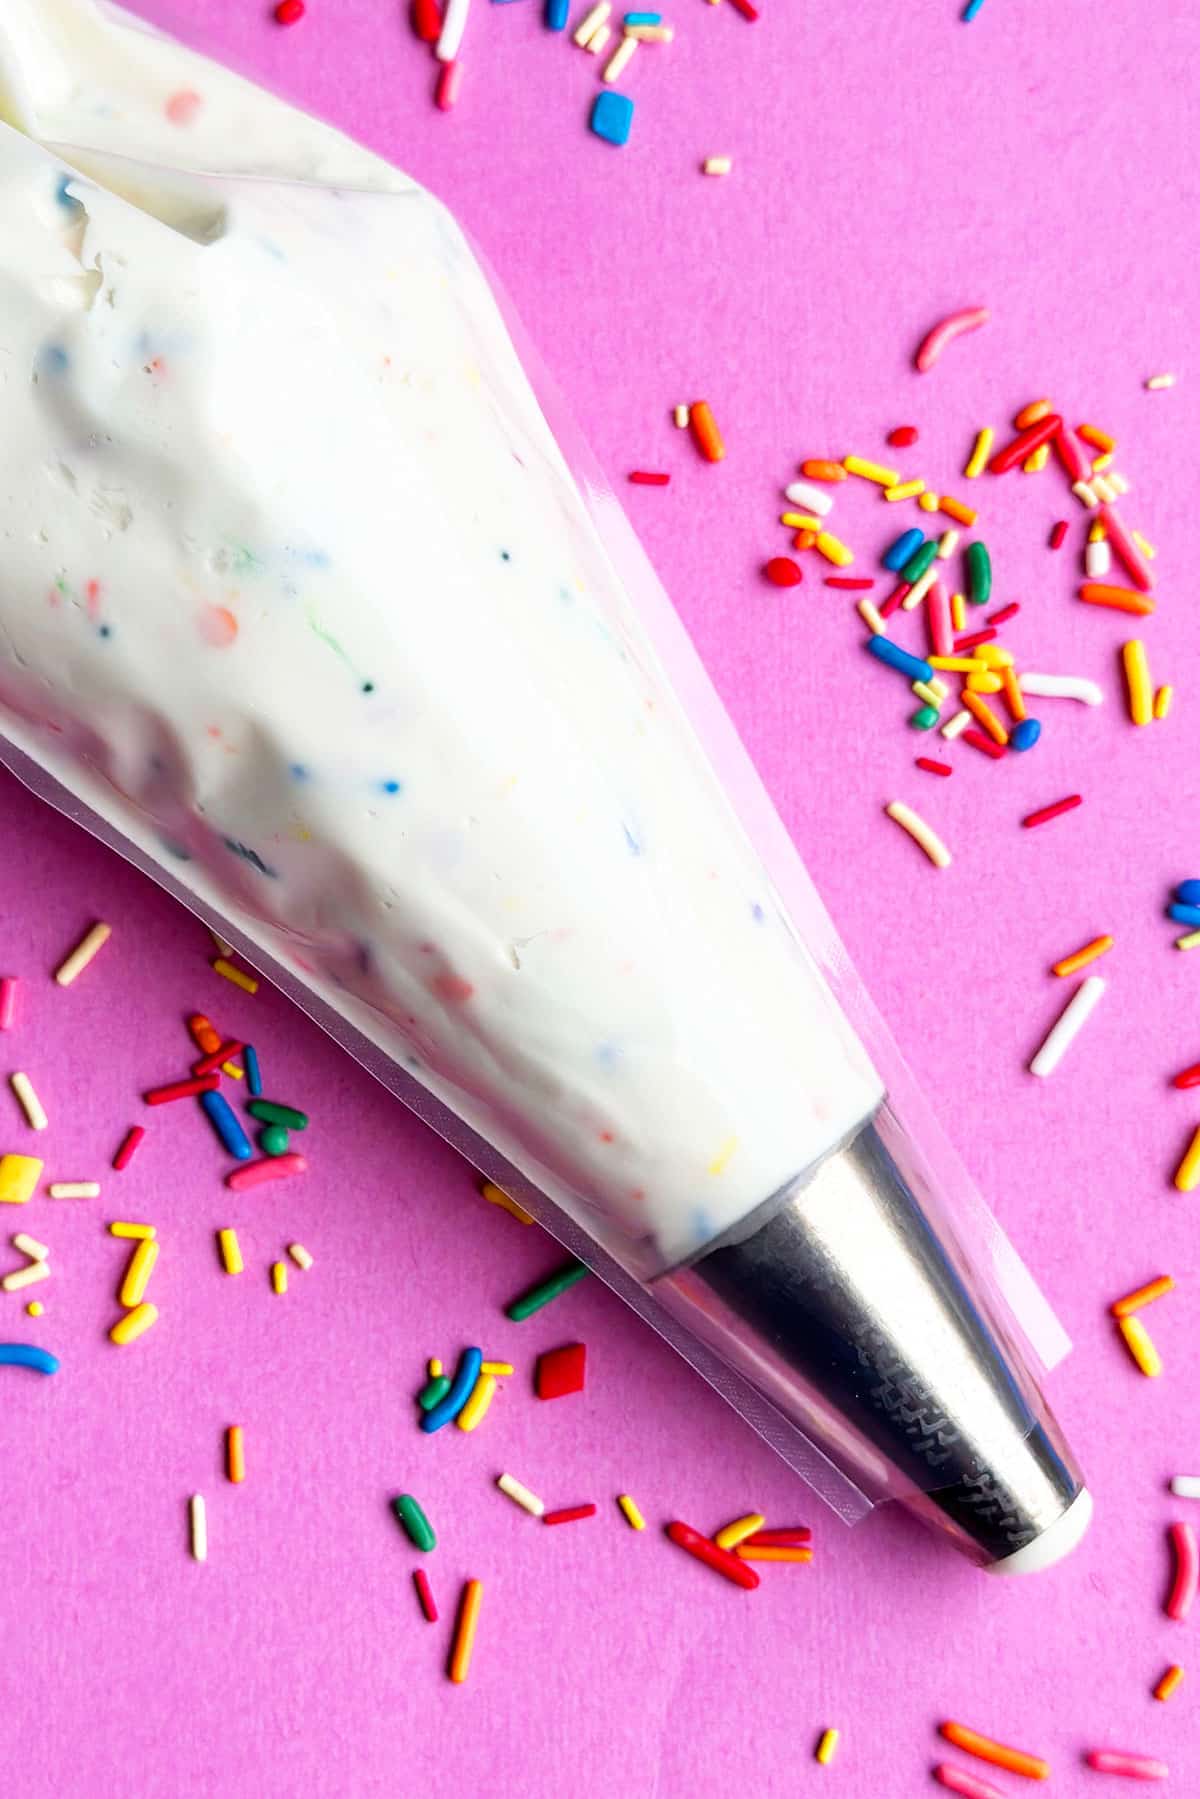 Piping Bag Filled With Vanilla Buttercream Frosting With Sprinkles.